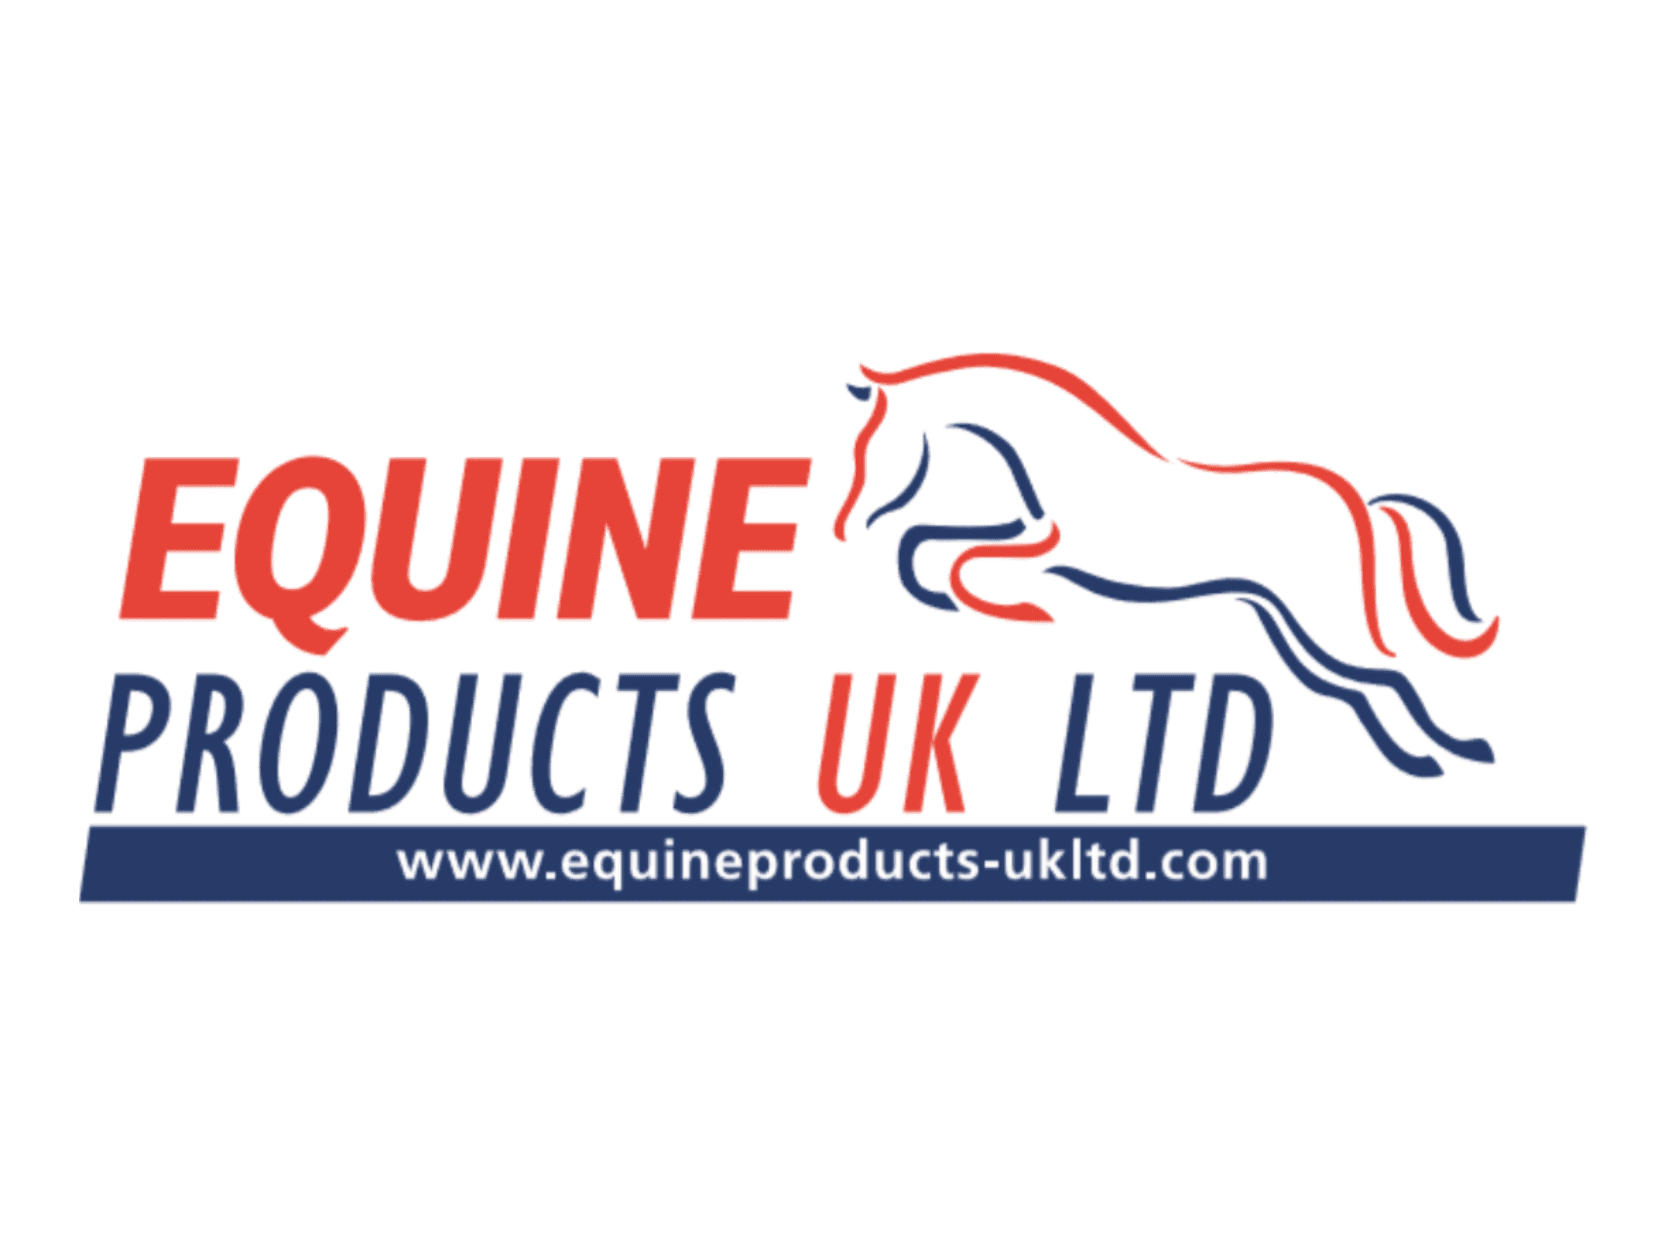 Equine products - Rittforsridsport